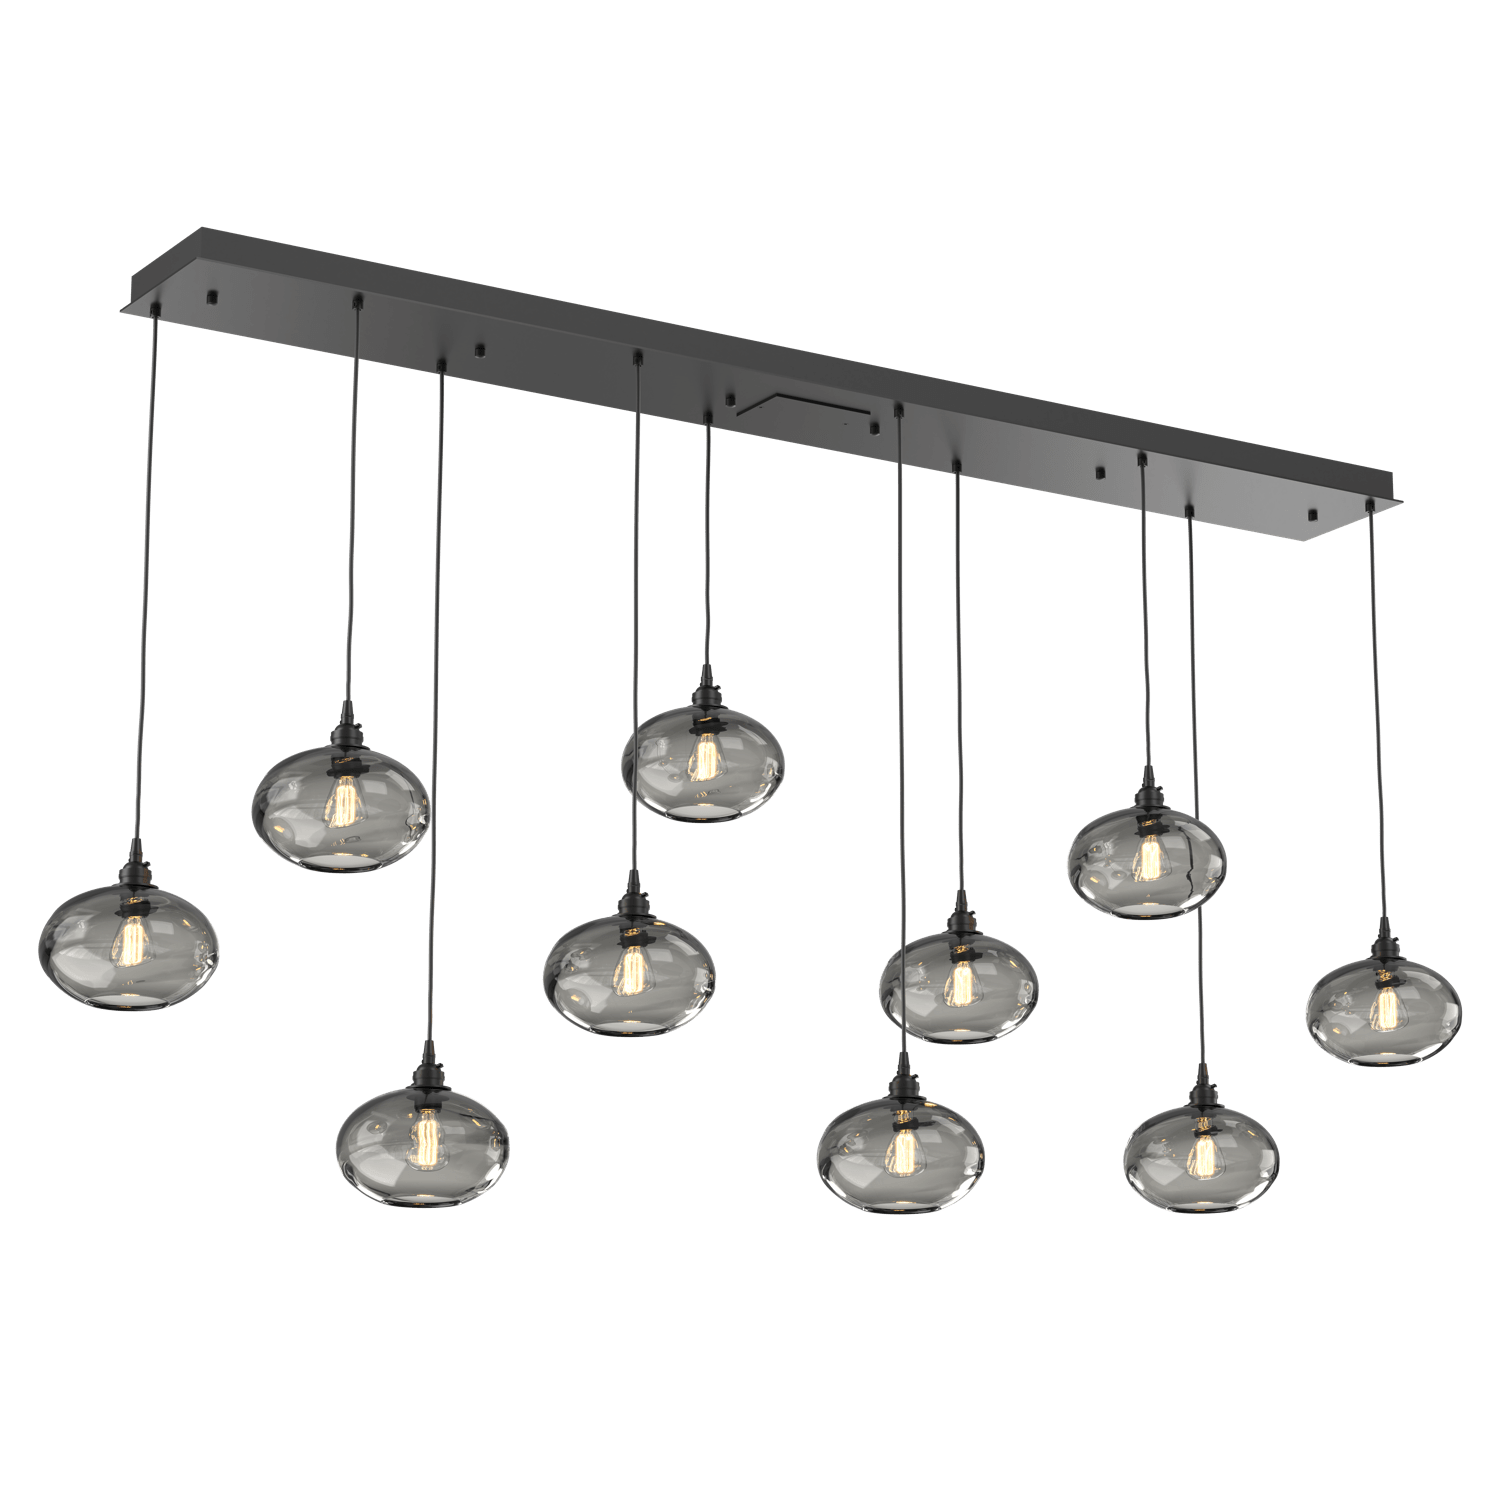 PLB0036-10-MB-OS-Hammerton-Studio-Optic-Blown-Glass-Coppa-10-light-linear-pendant-chandelier-with-matte-black-finish-and-optic-smoke-blown-glass-shades-and-incandescent-lamping